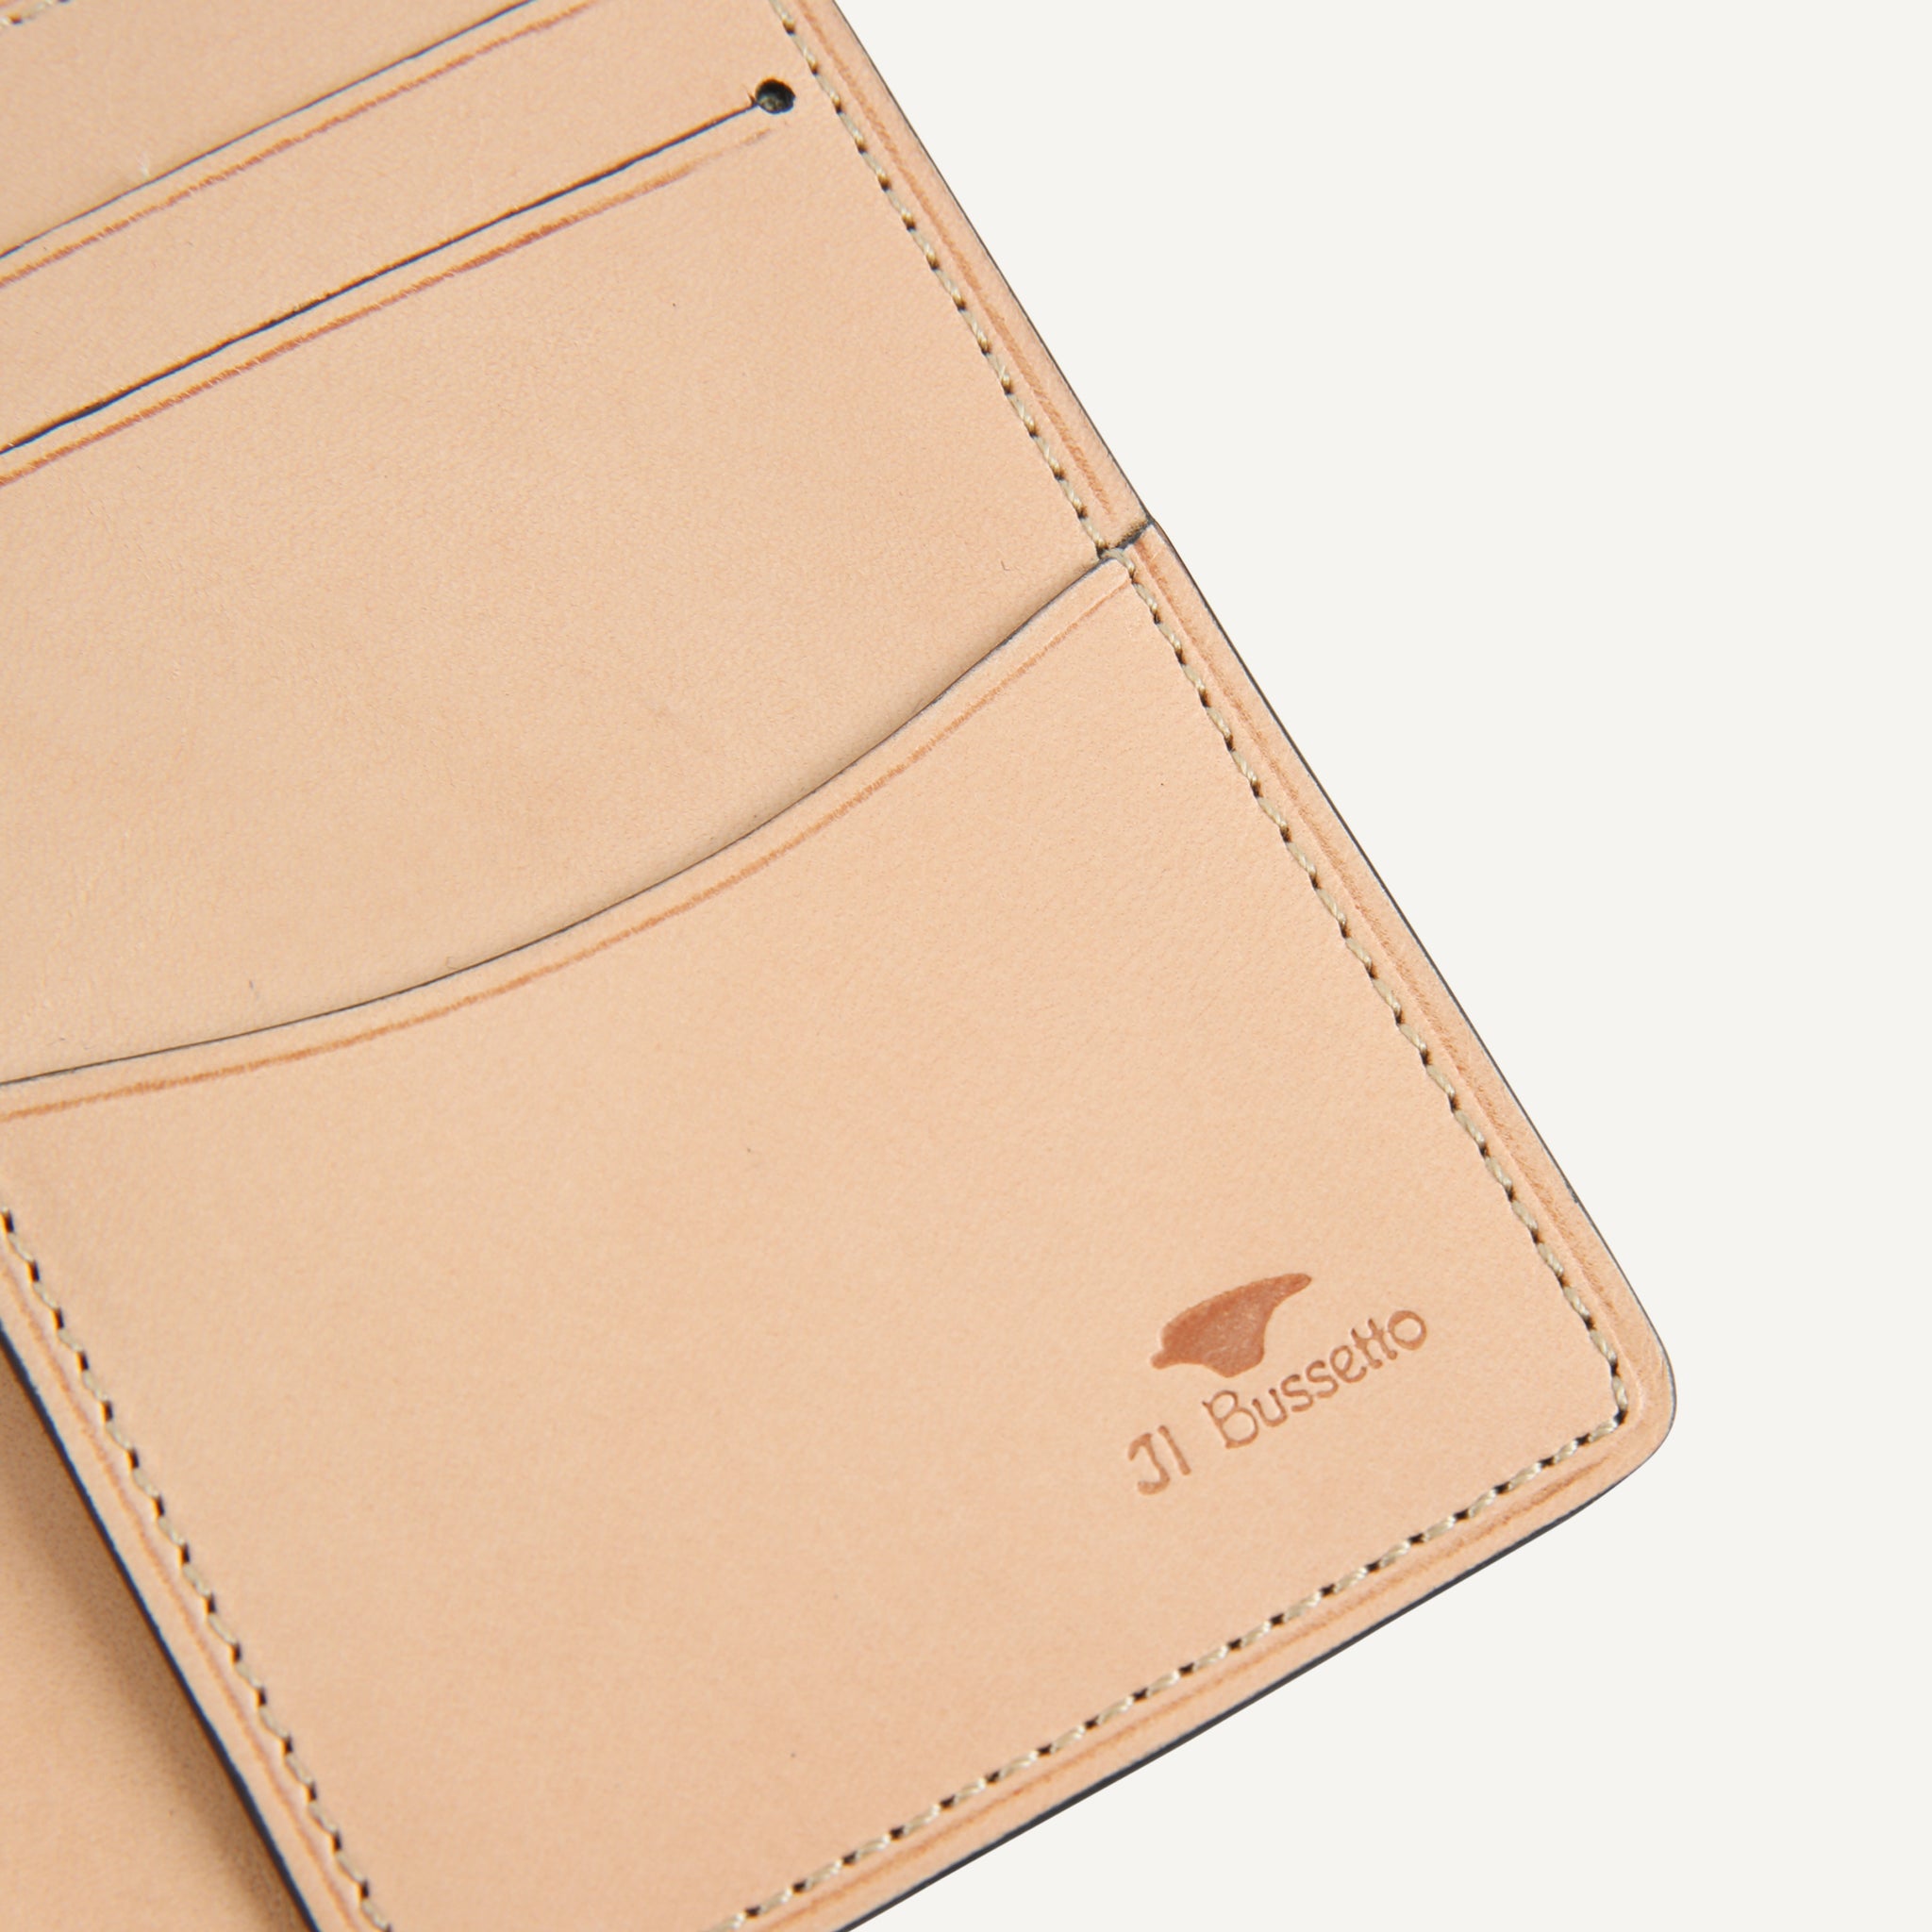 IL BUSSETTO BIFOLD CARD HOLDER